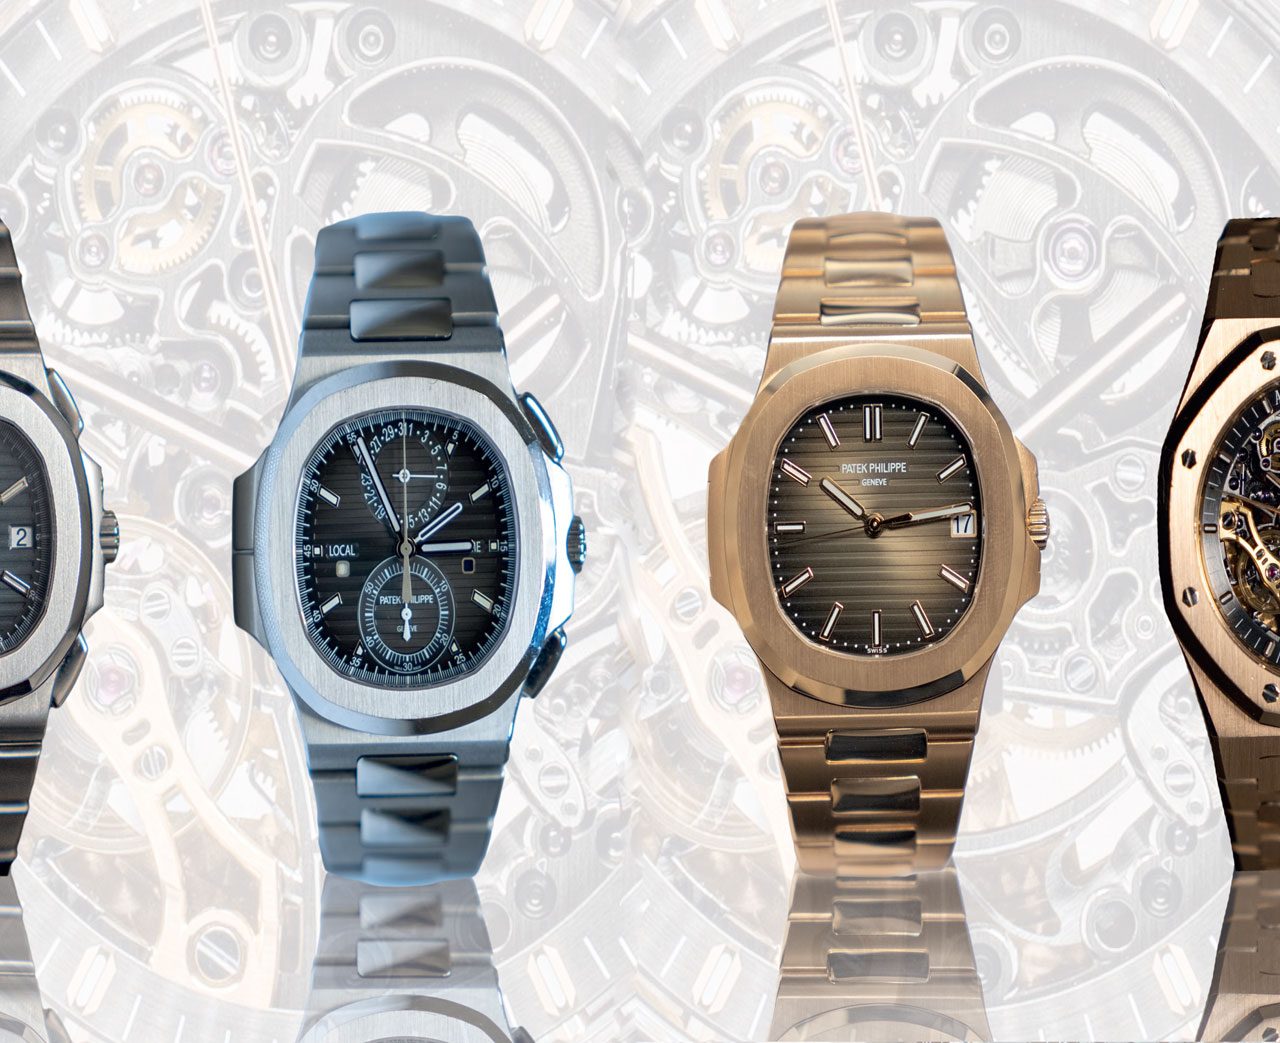 Rejecting Digital: Sourcing & Valuing Luxury Timepieces in the Modern Age